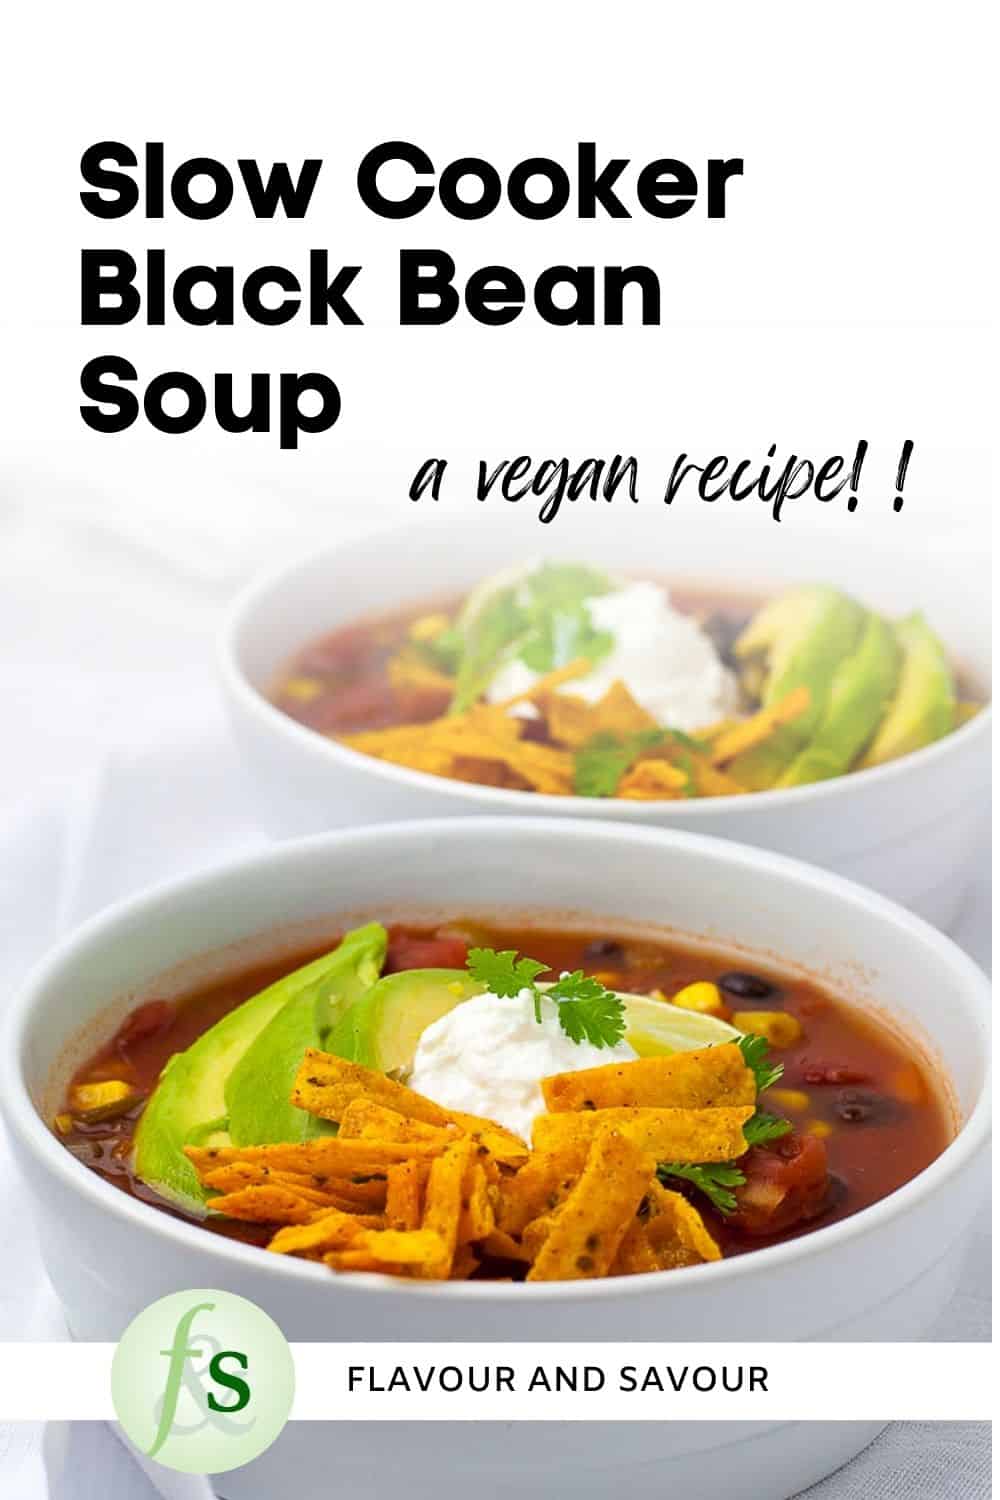 Image with text overlay for slow cooker vegan black bean soup.